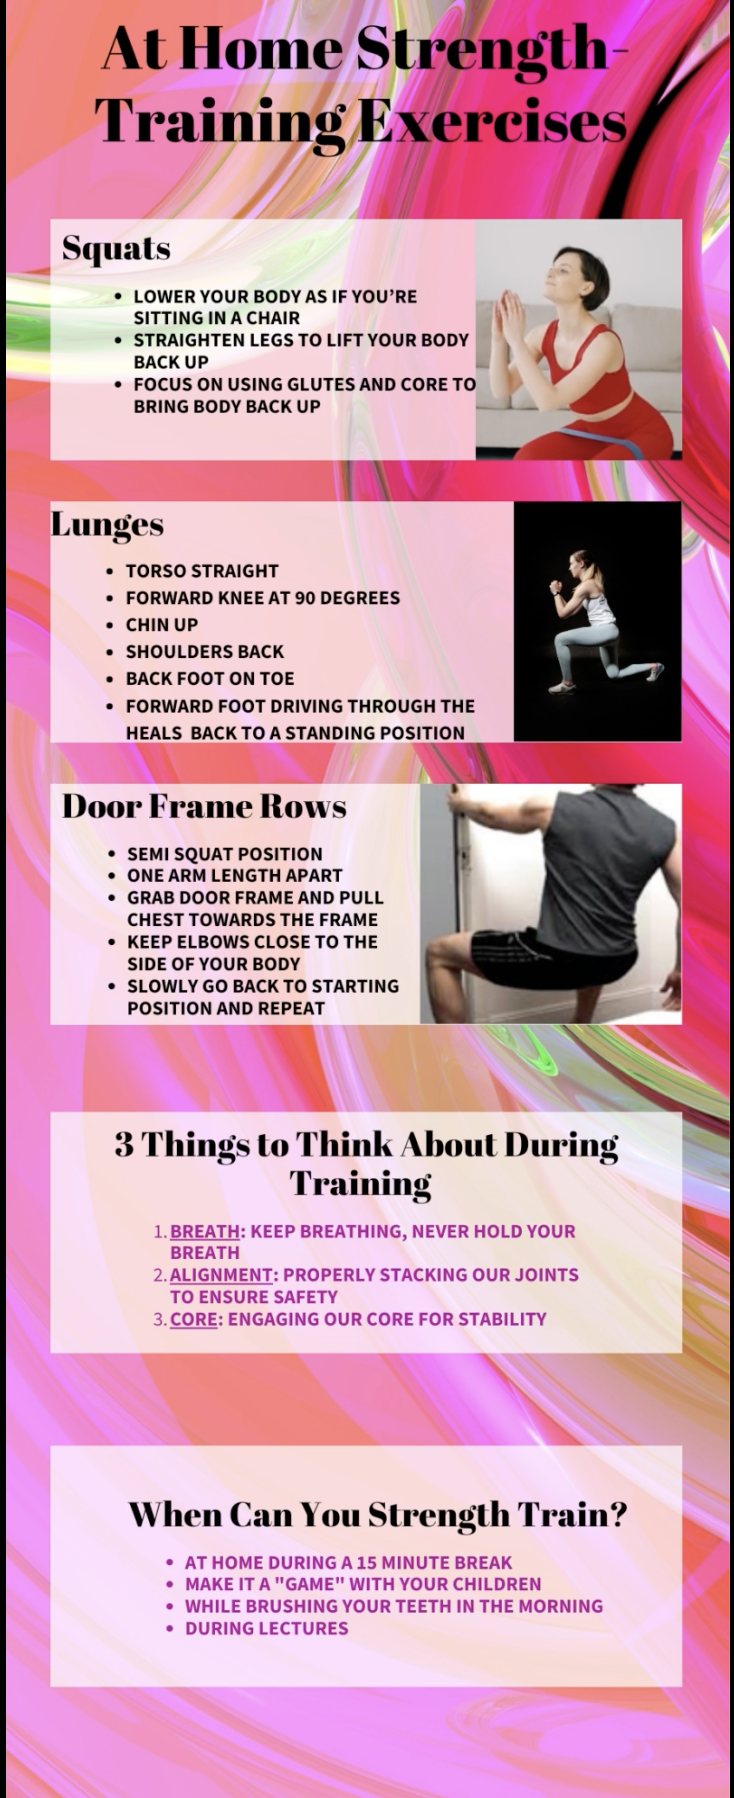 At home strength training - squats, lunges, door frame rows